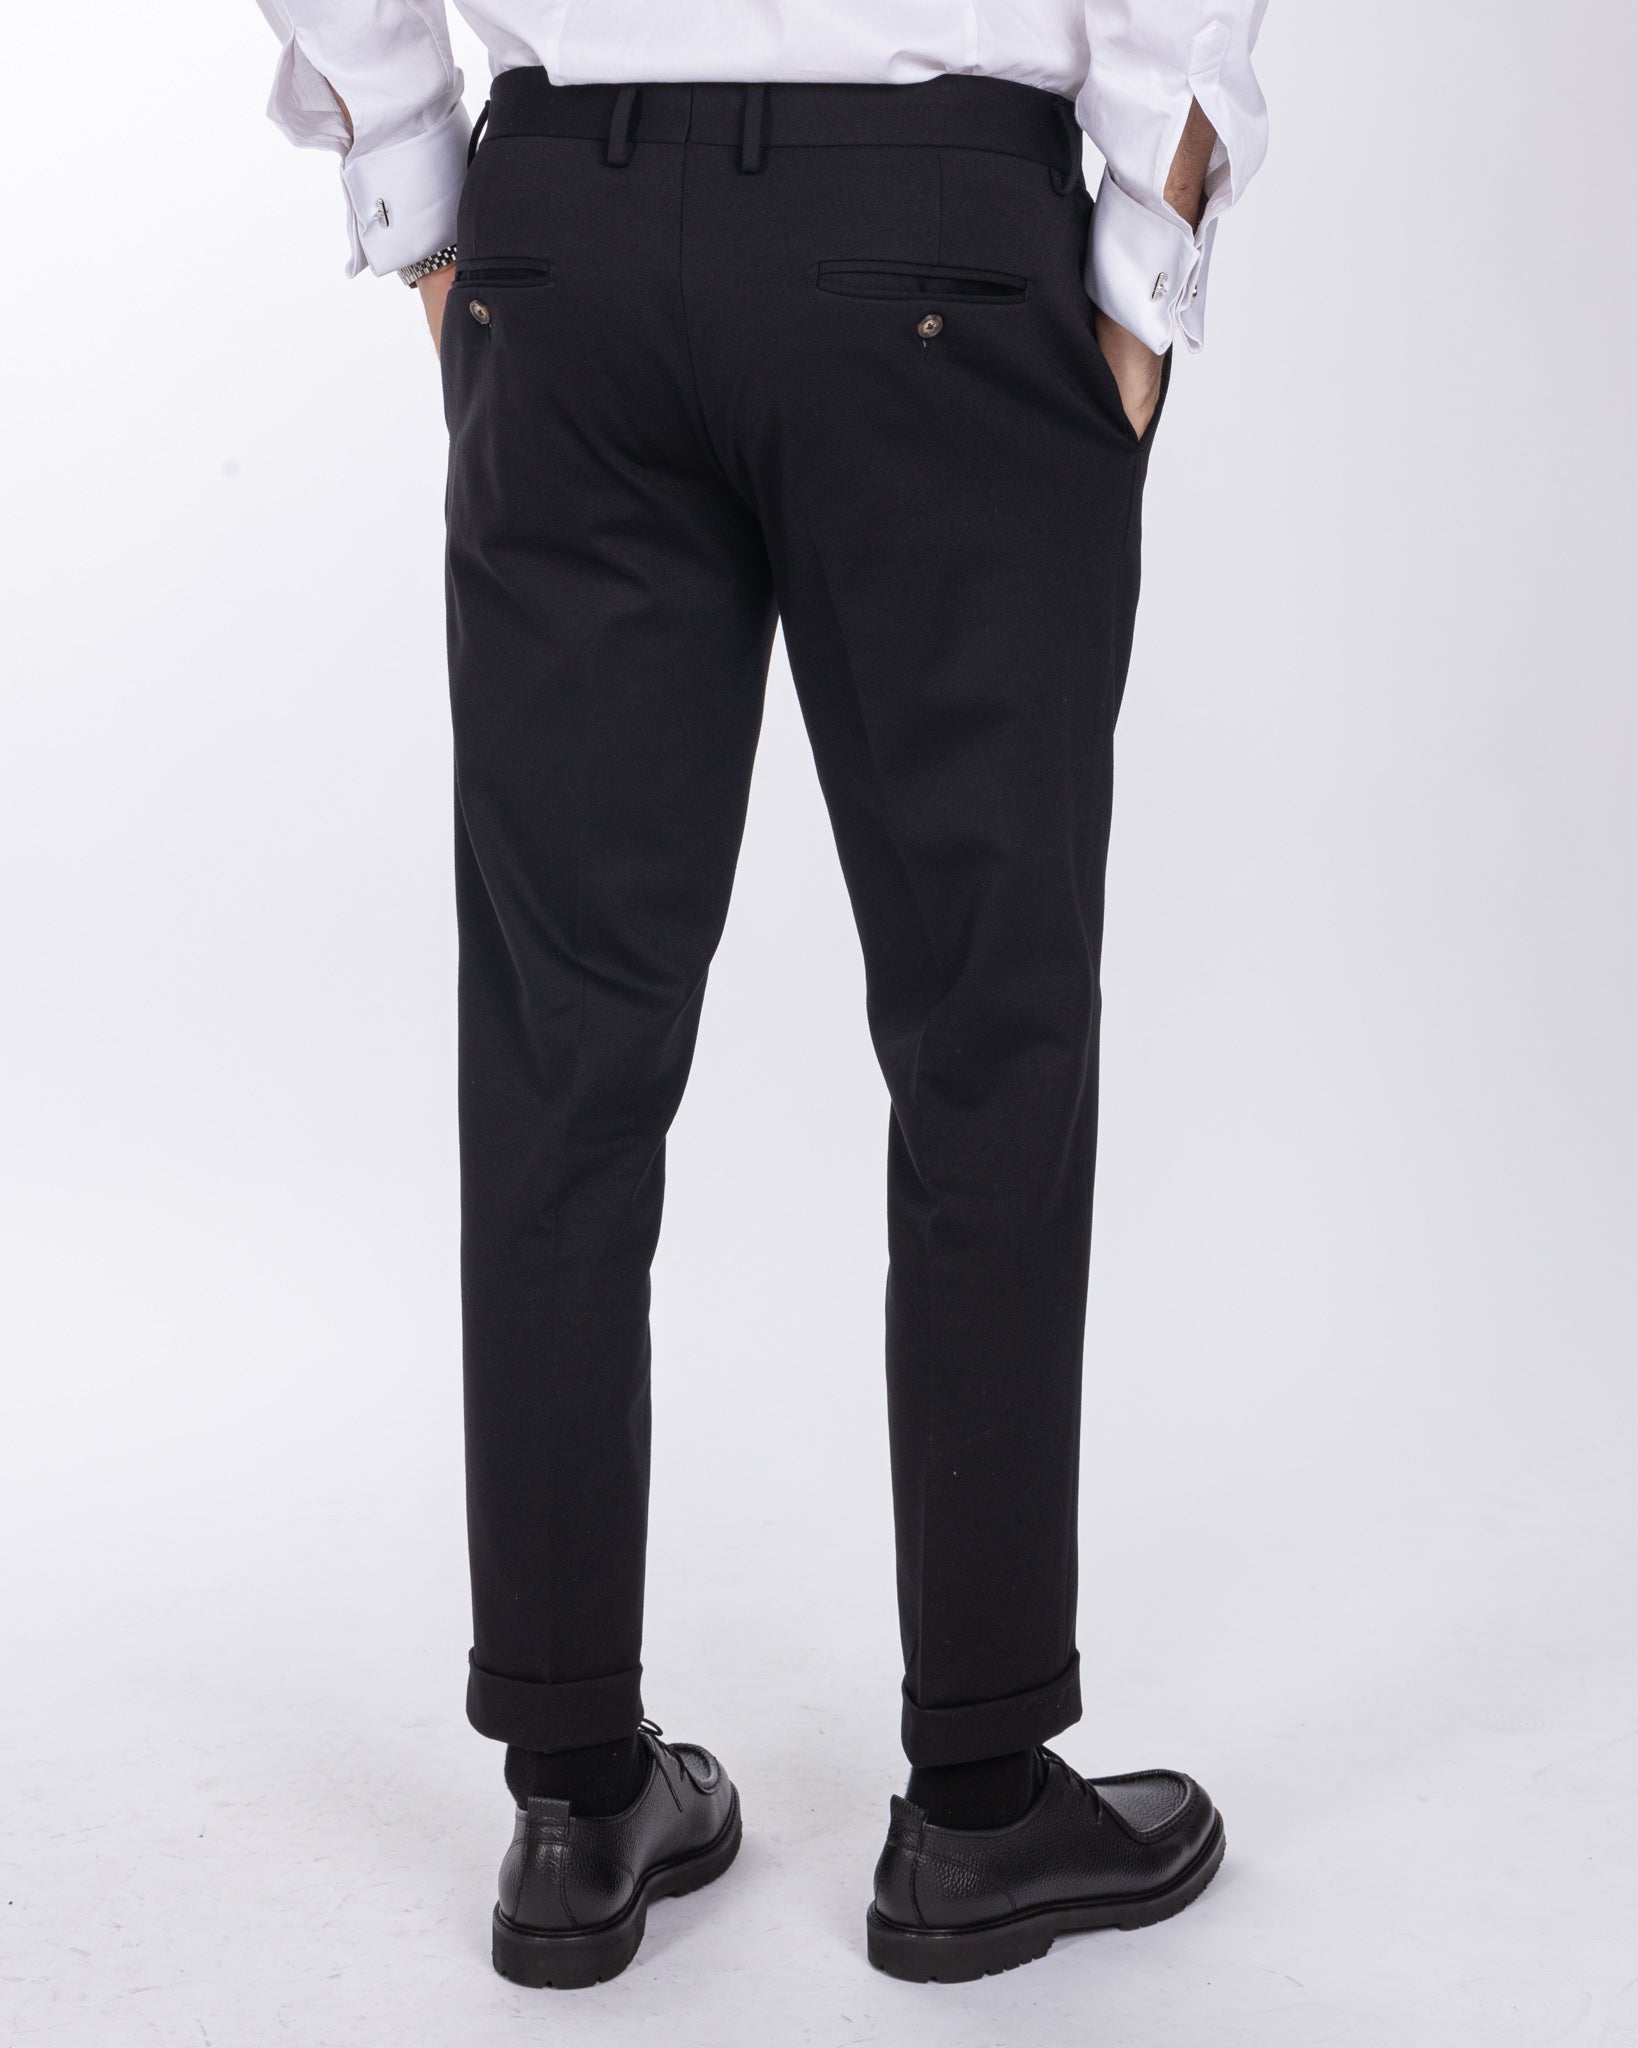 Firenze - trousers with a black pleat in Milan stitch